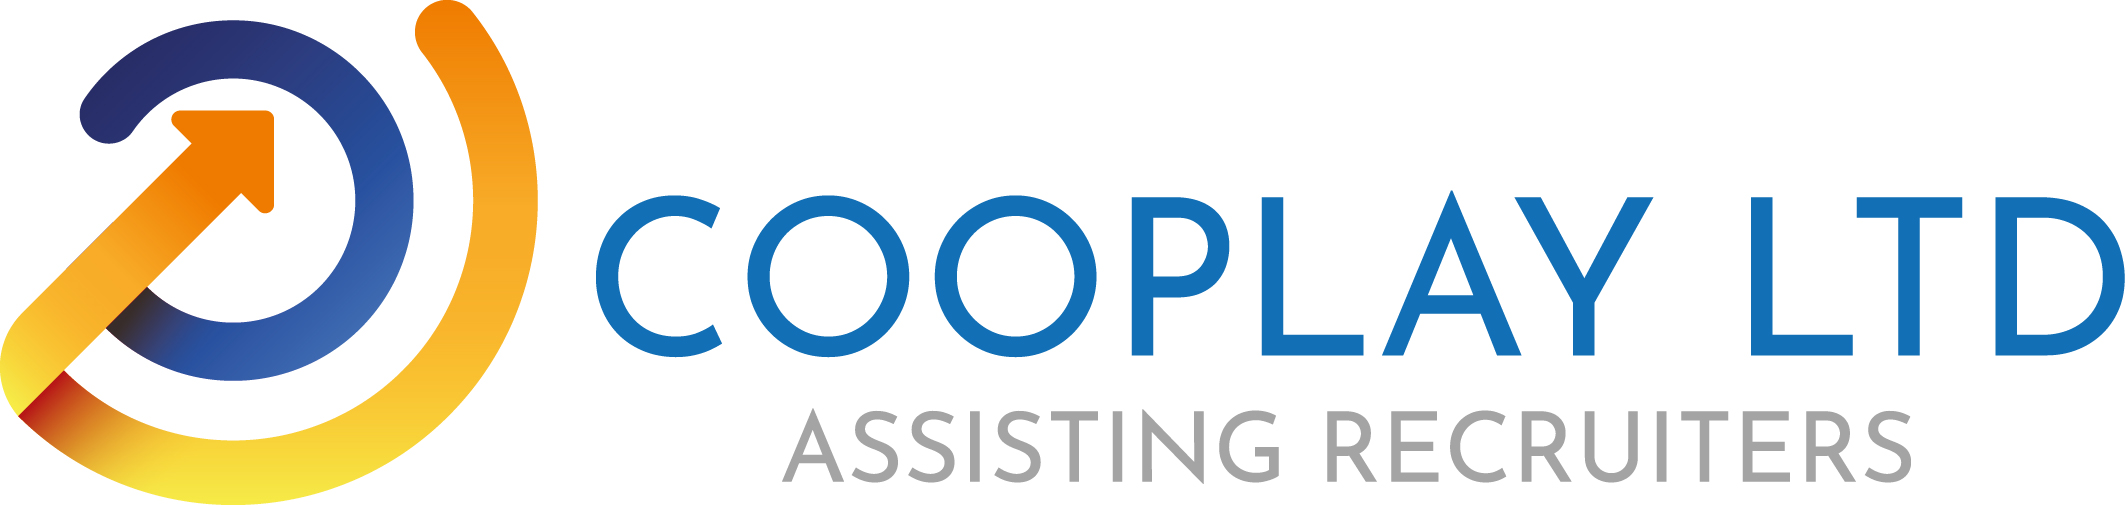 Cooplay – Assisting Recruiters 